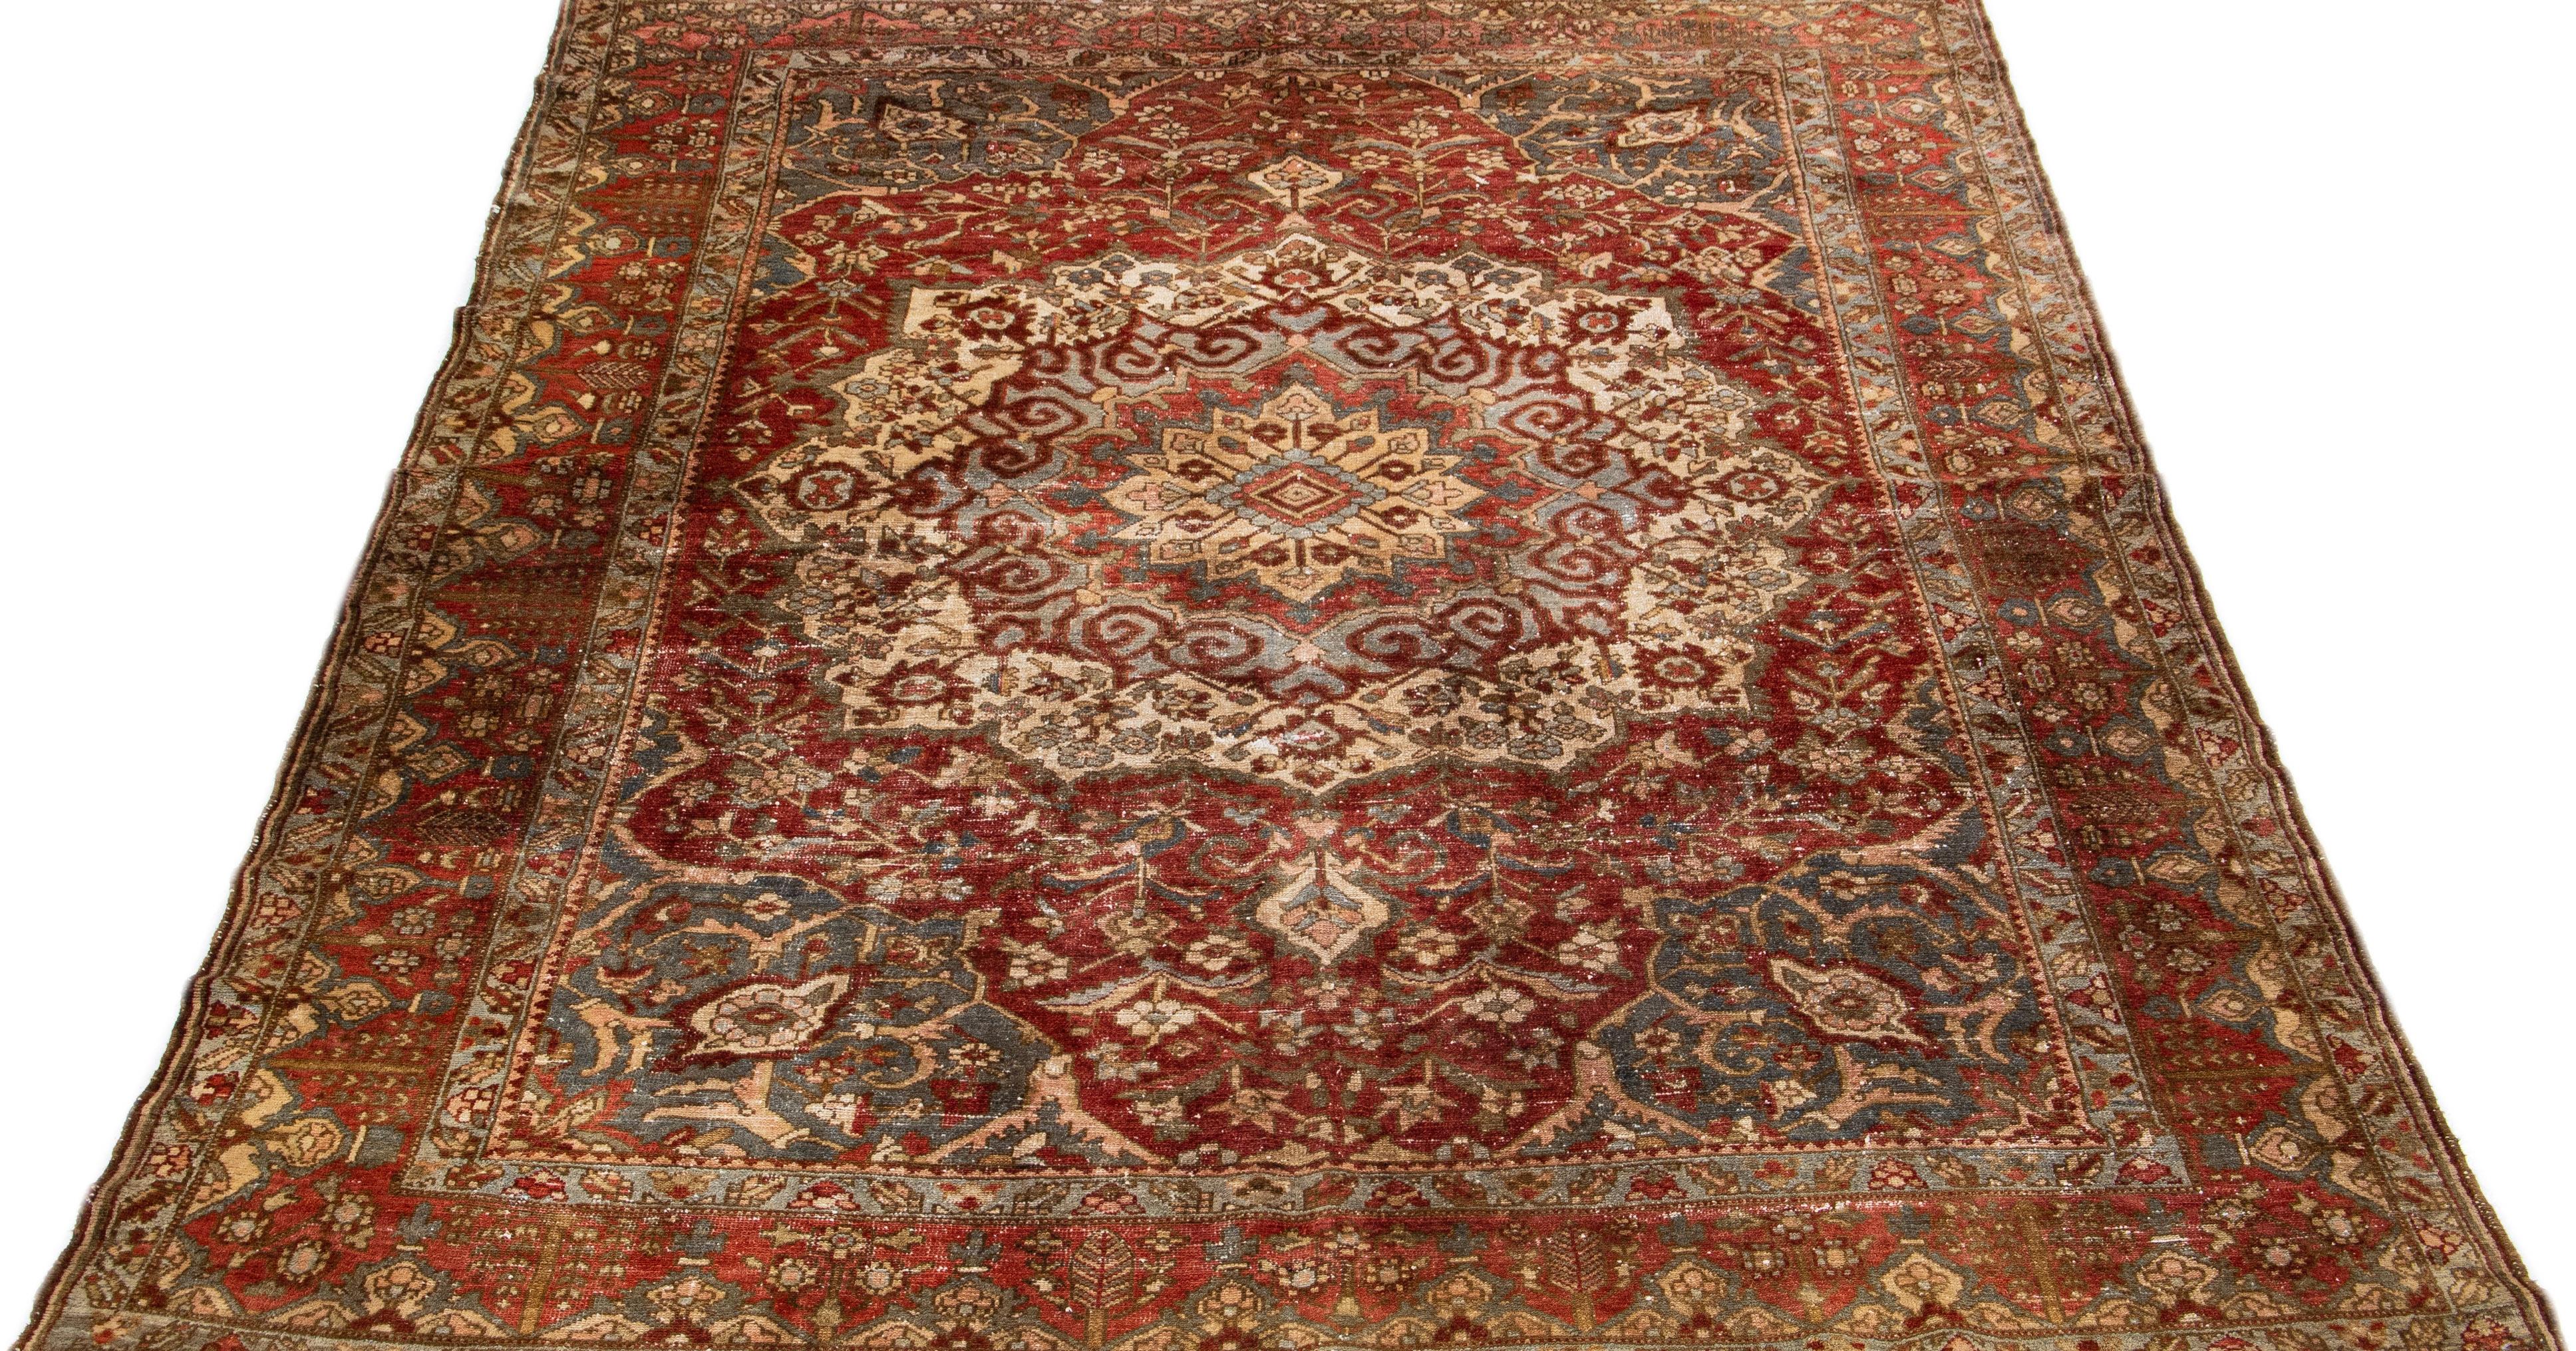 This Bakhtiari hand knotted wool rug features a rust field and multicolor accents on a Classic rosette design, crafted with the utmost care and detail.

This rug measures 9'10